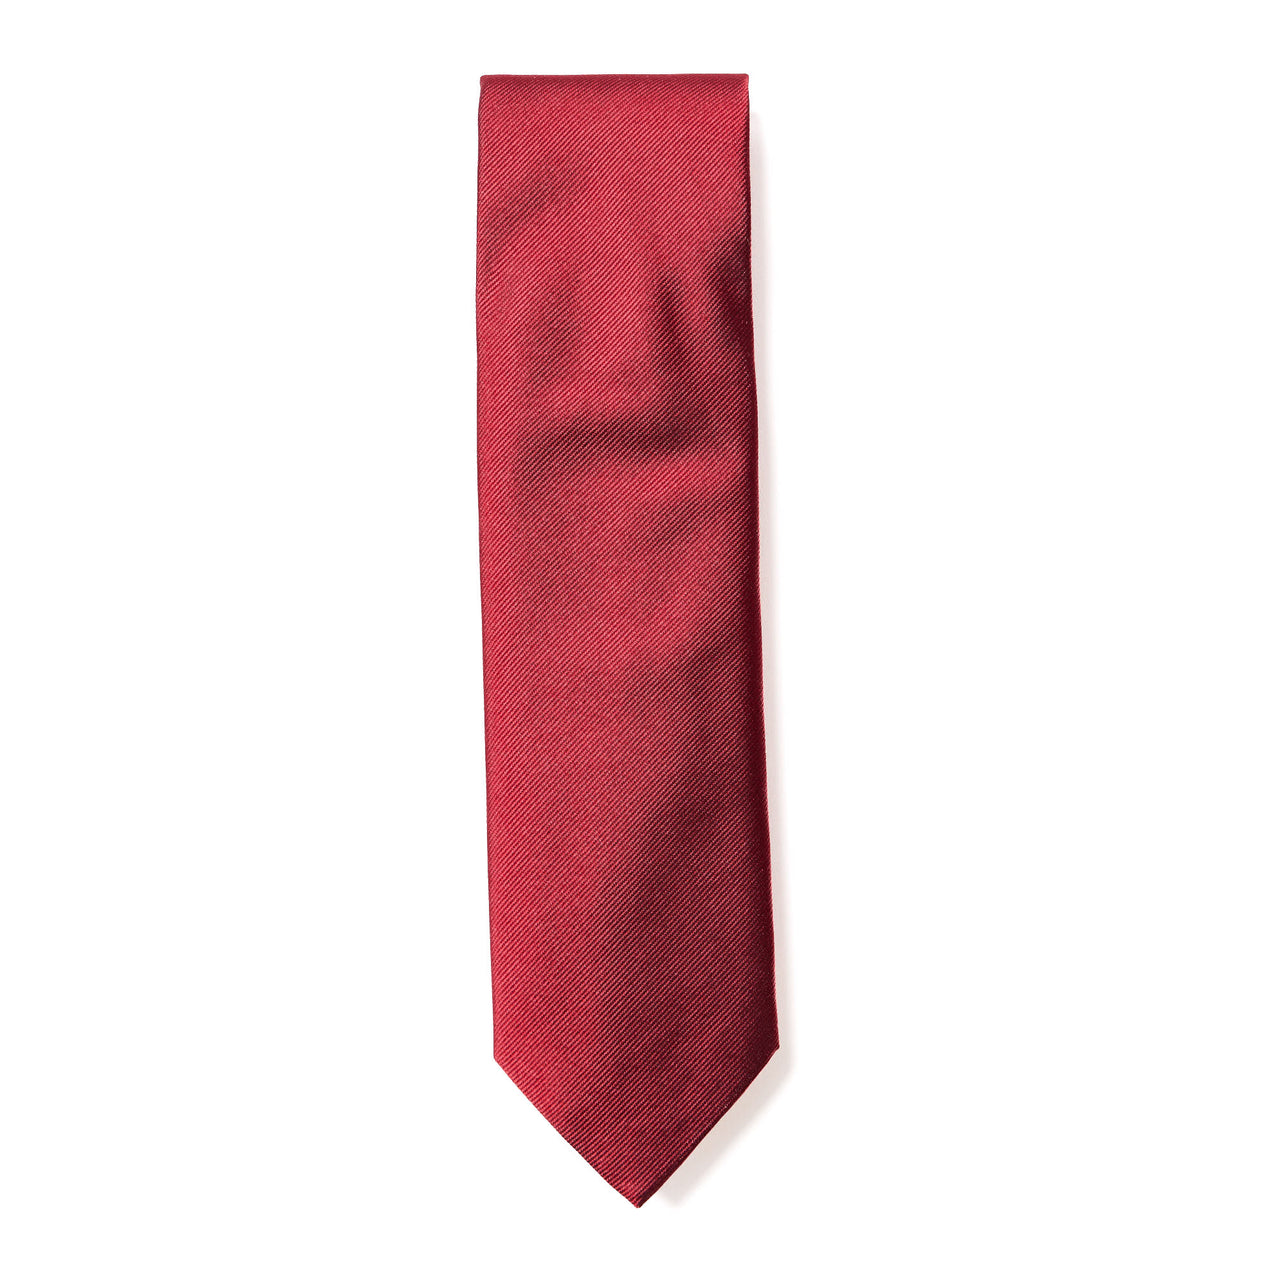 HENRY SARTORIAL X CANTINI Plain Woven Tie RED